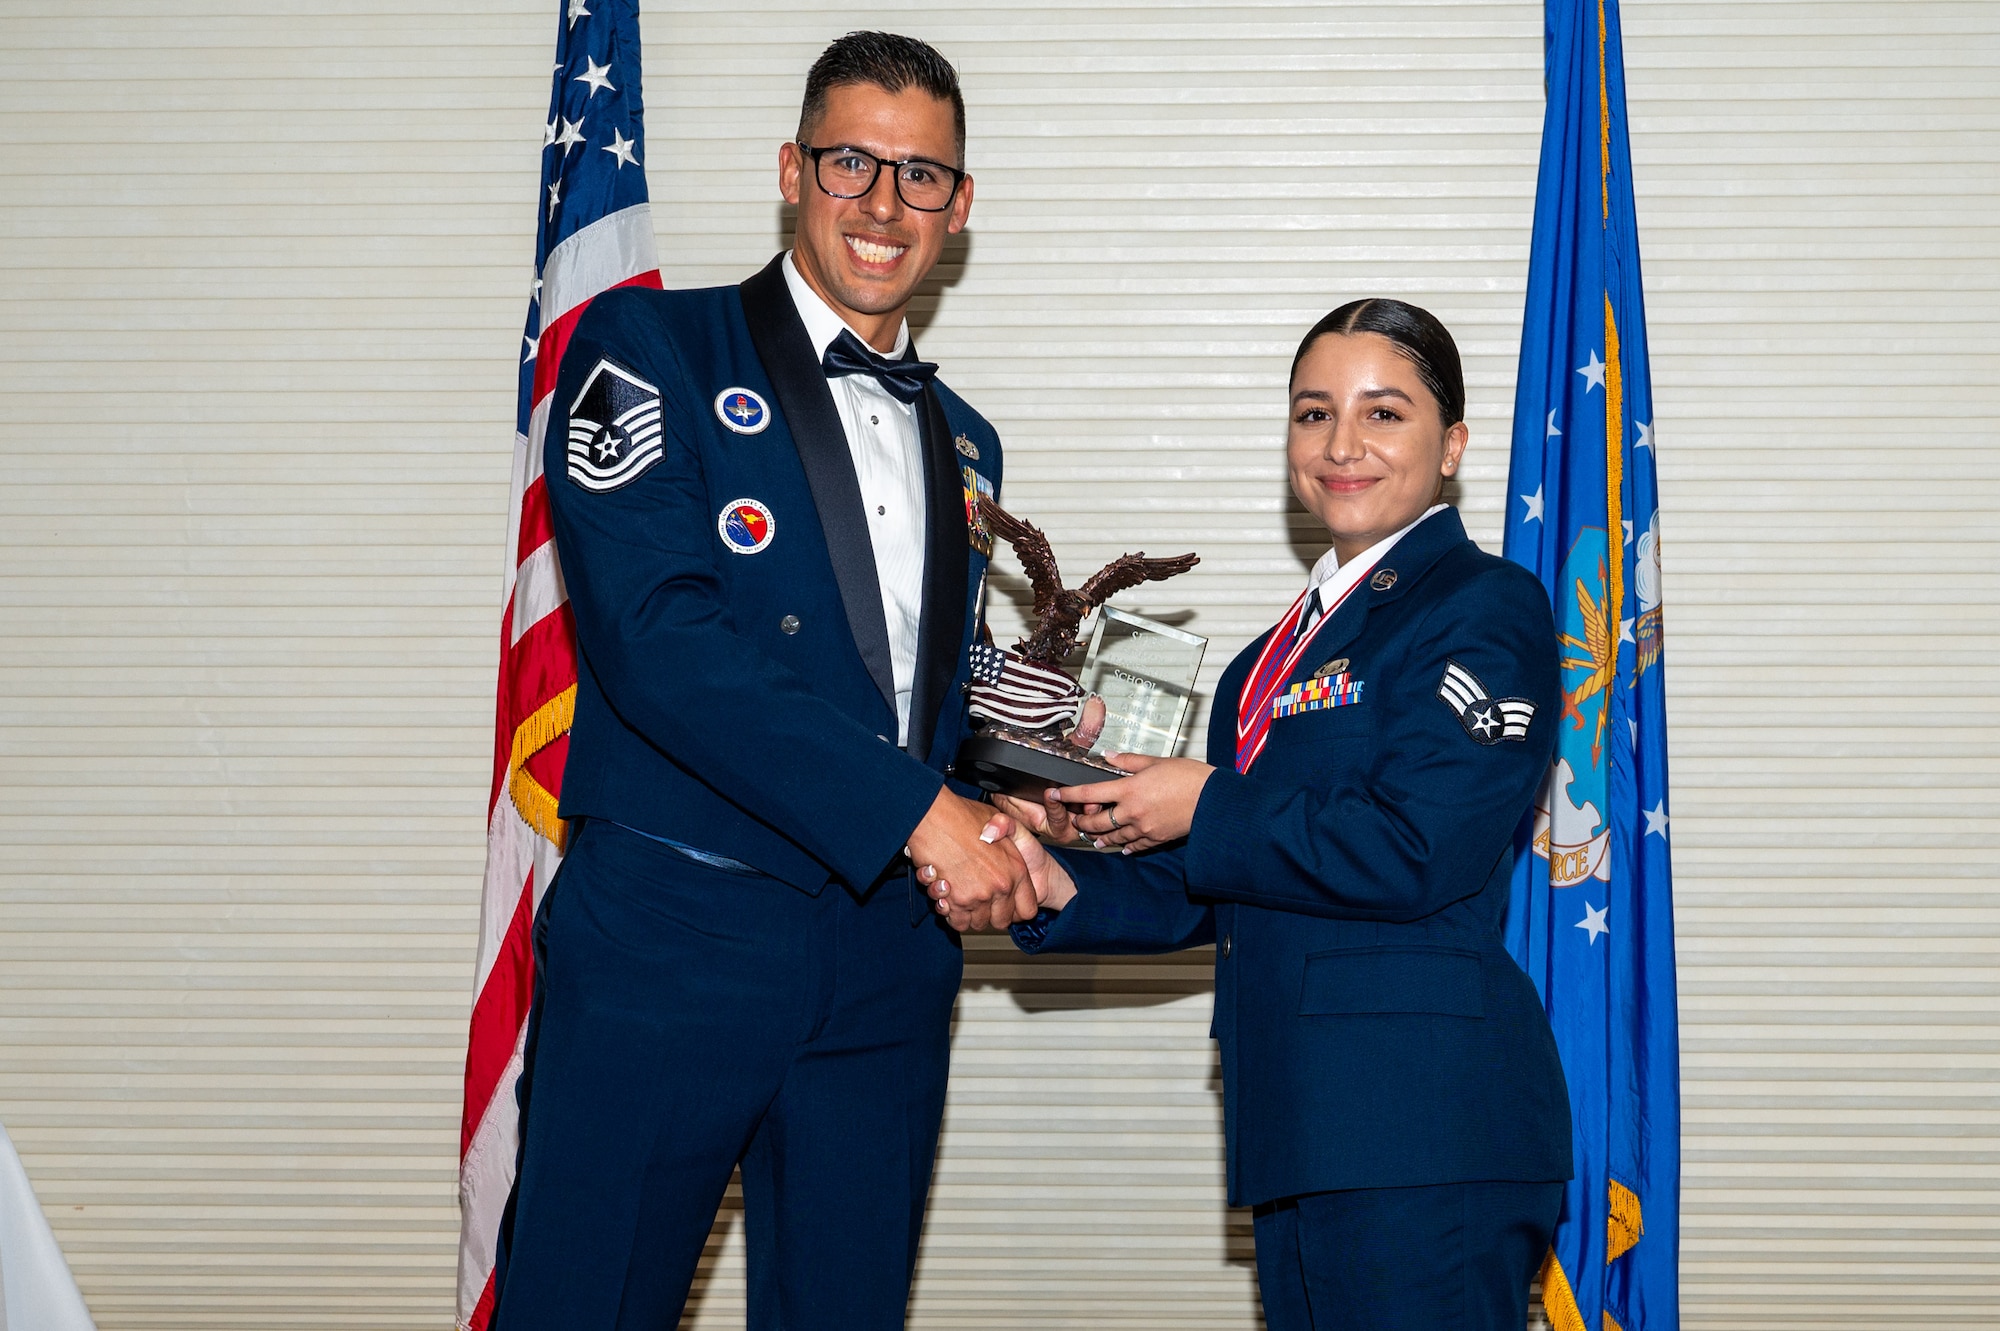 Senior Airman Hannah Garcia, assigned to the 335th Fighter Squadron, right, receives the Commandant’s Award from Master Sgt. Mark Benevides, Airman Leadership School instructor, during the ALS class 24-C graduation ceremony at Seymour Johnson Air Force Base, North Carolina, Mar. 20, 2024. The Commandant’s Award is presented to an ALS graduate that possessed the highest degree of character, competence, and commitment during the ALS course. (U.S. Air Force photo by Airman Rebecca Tierney)